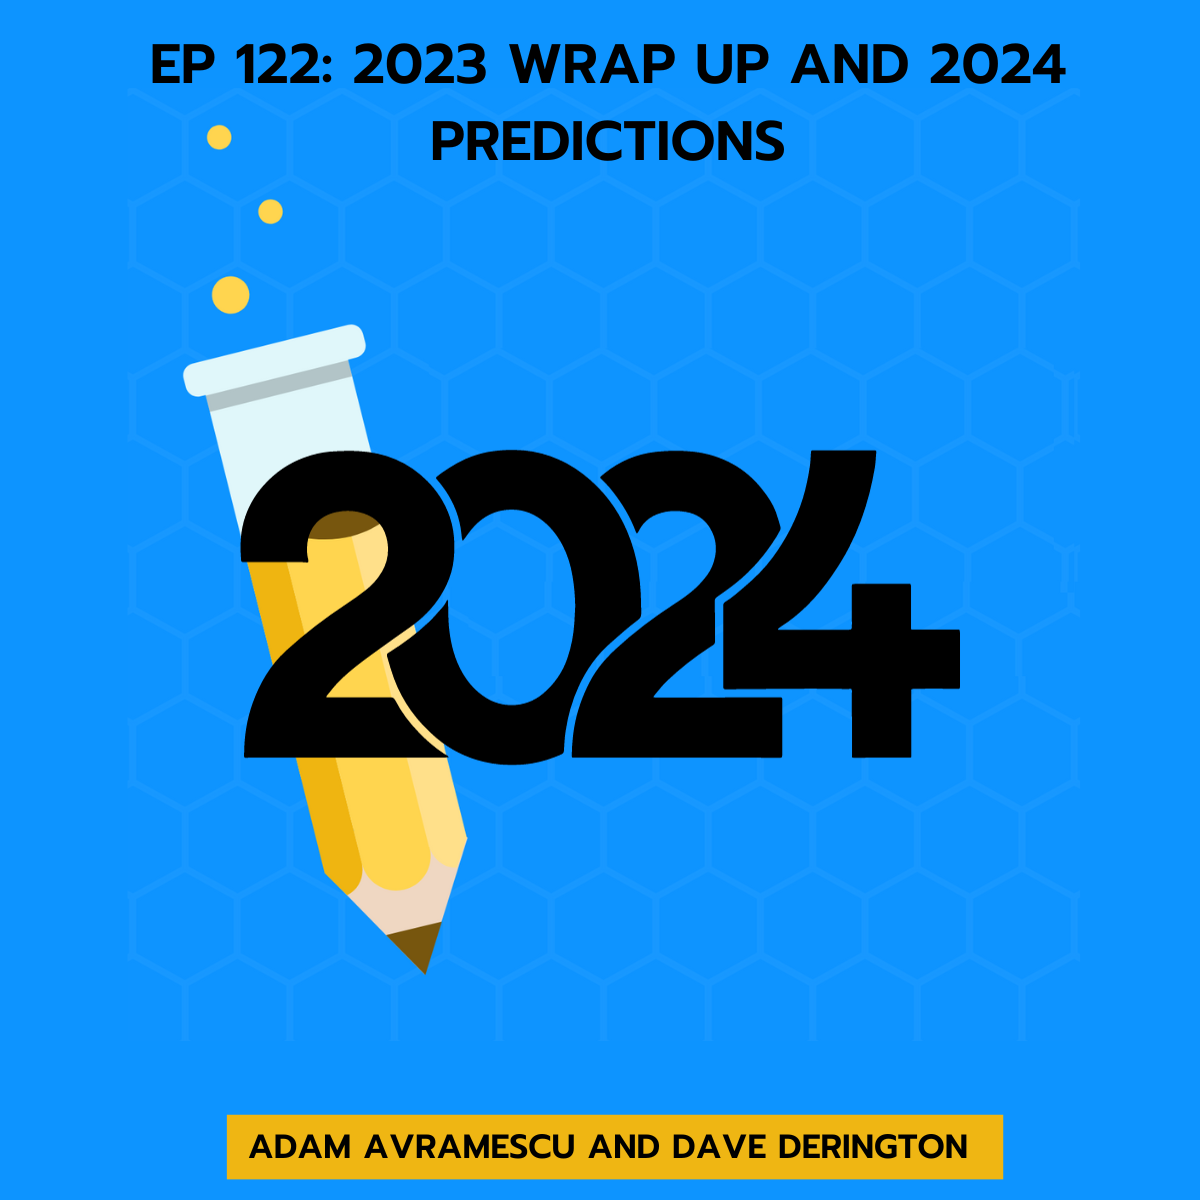 Episode 122 - 2023 Wrap-Up and 2024 Predictions